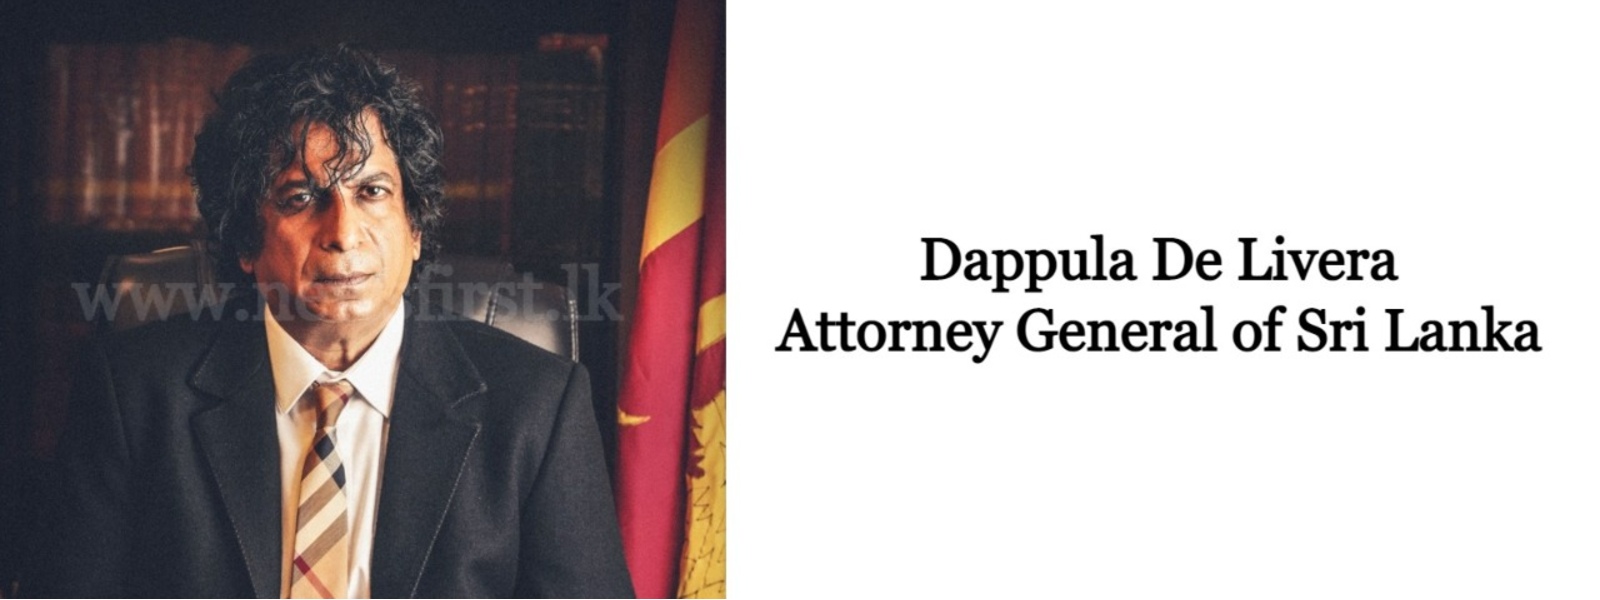 EXCLUSIVE: Rule of Law has suffered due to delays in Justice system; Retiring AG De Livera